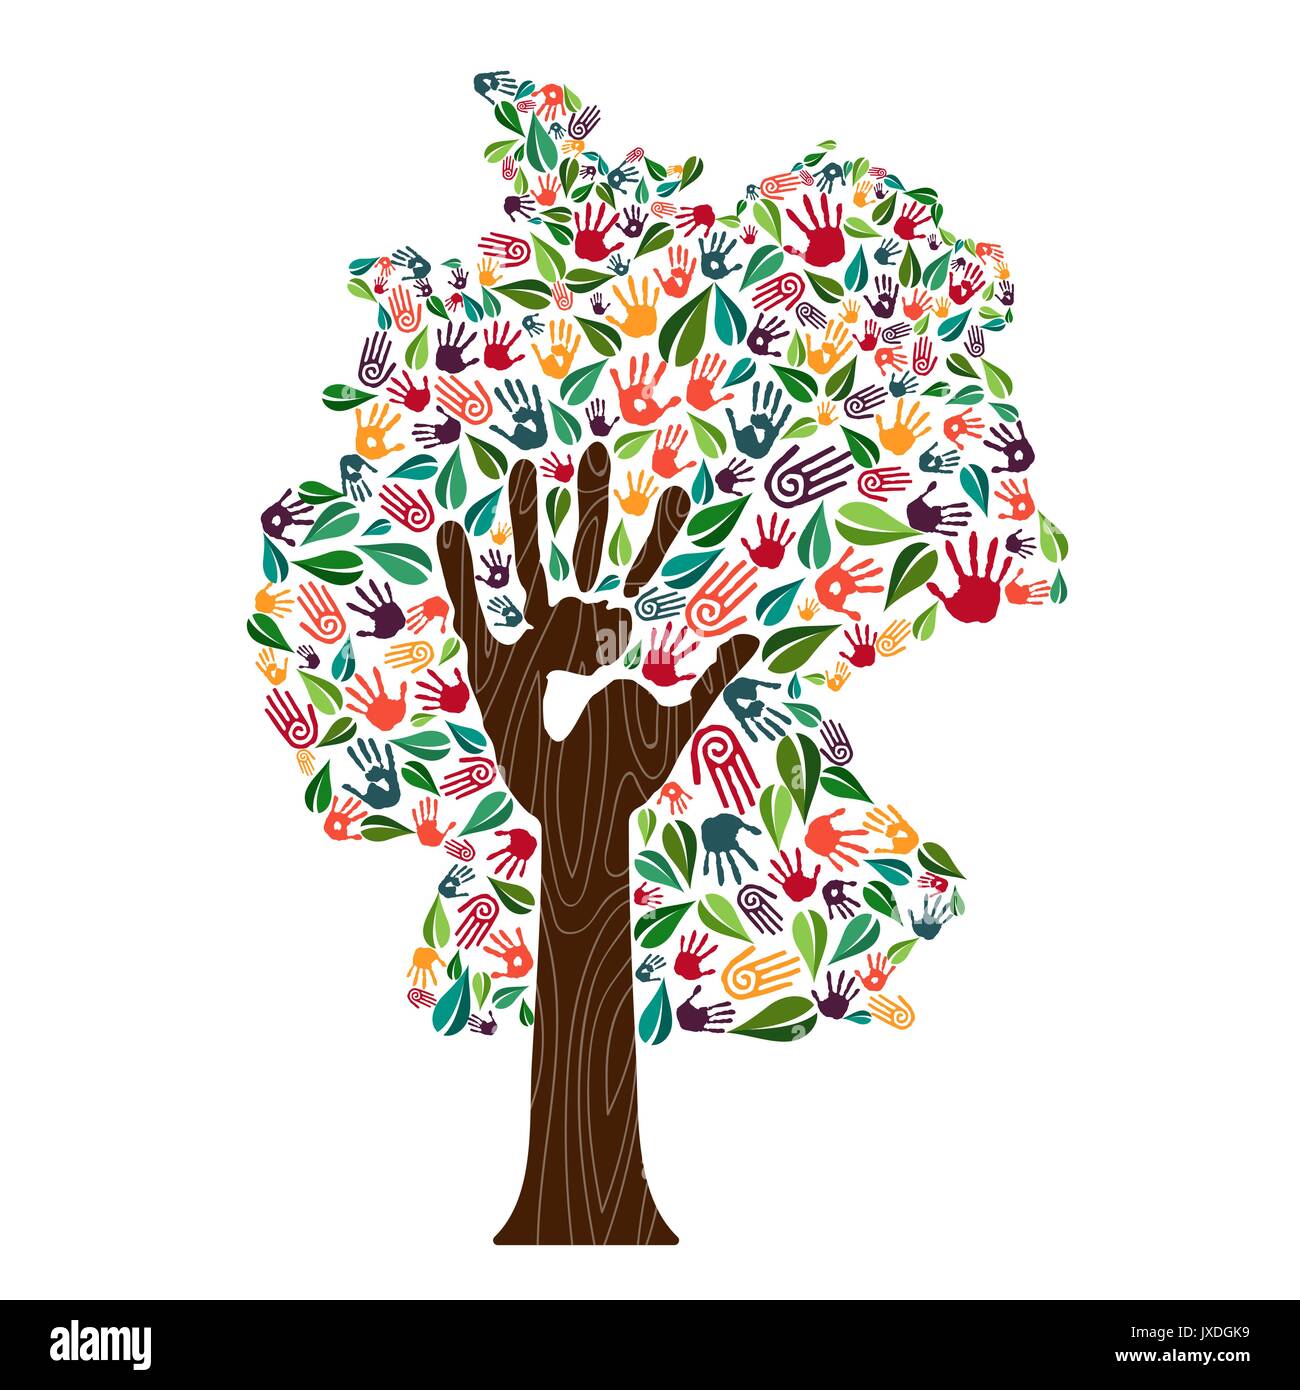 Tree with german country shape and human hand prints. Germany world help concept illustration for charity work, environment care or social project. EP Stock Vector